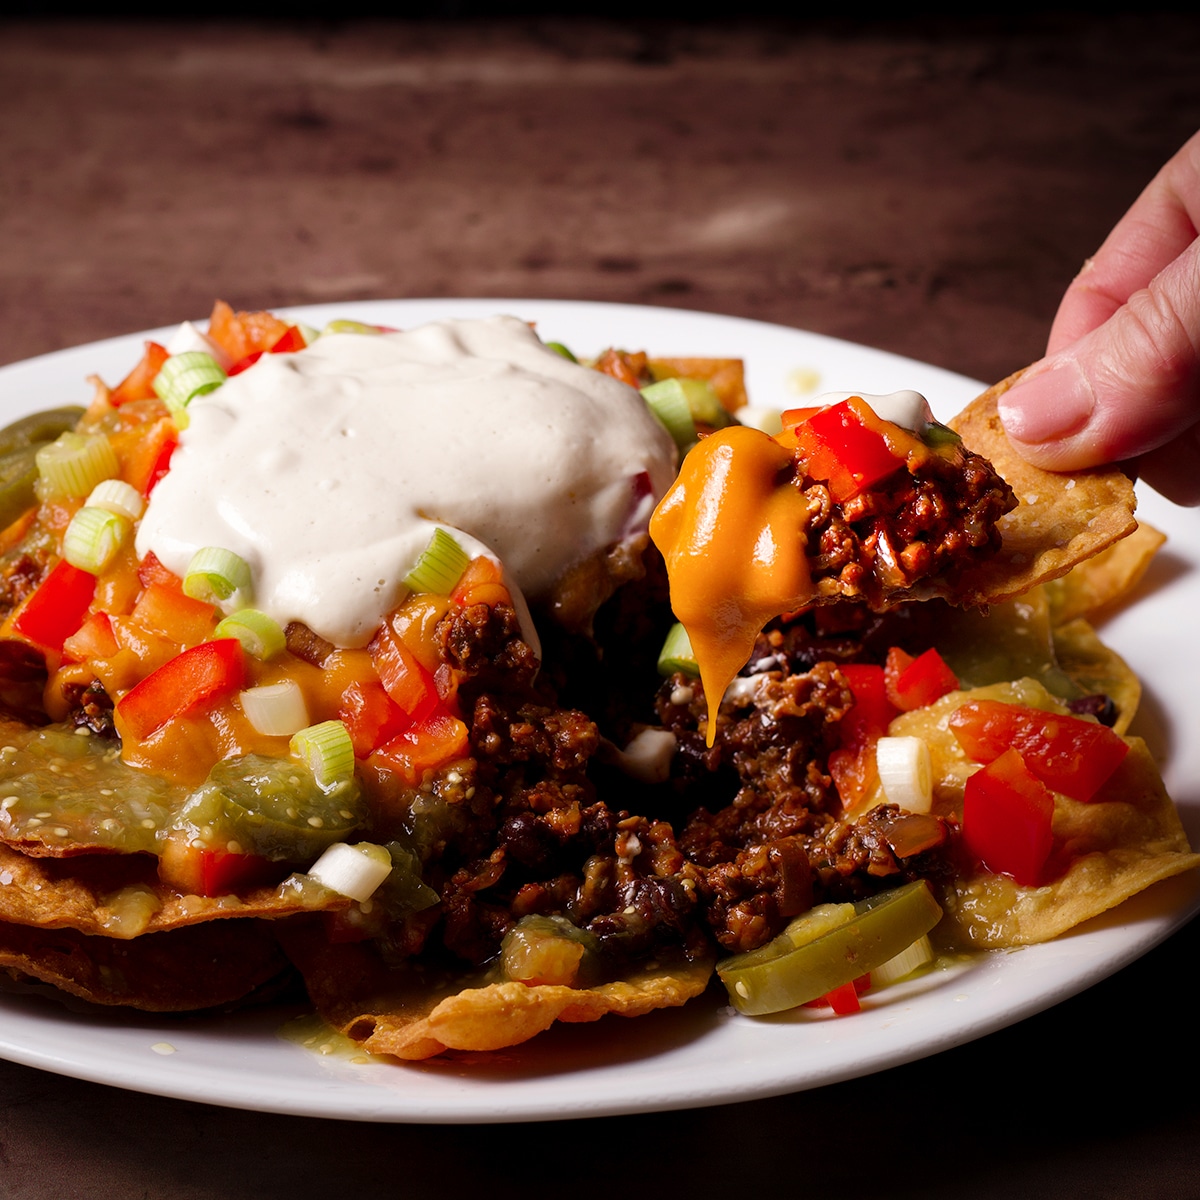 Someone lifting a tortilla chip loaded with vegan taco meat and vegan nacho cheese sauce from a plate of vegan nachos.